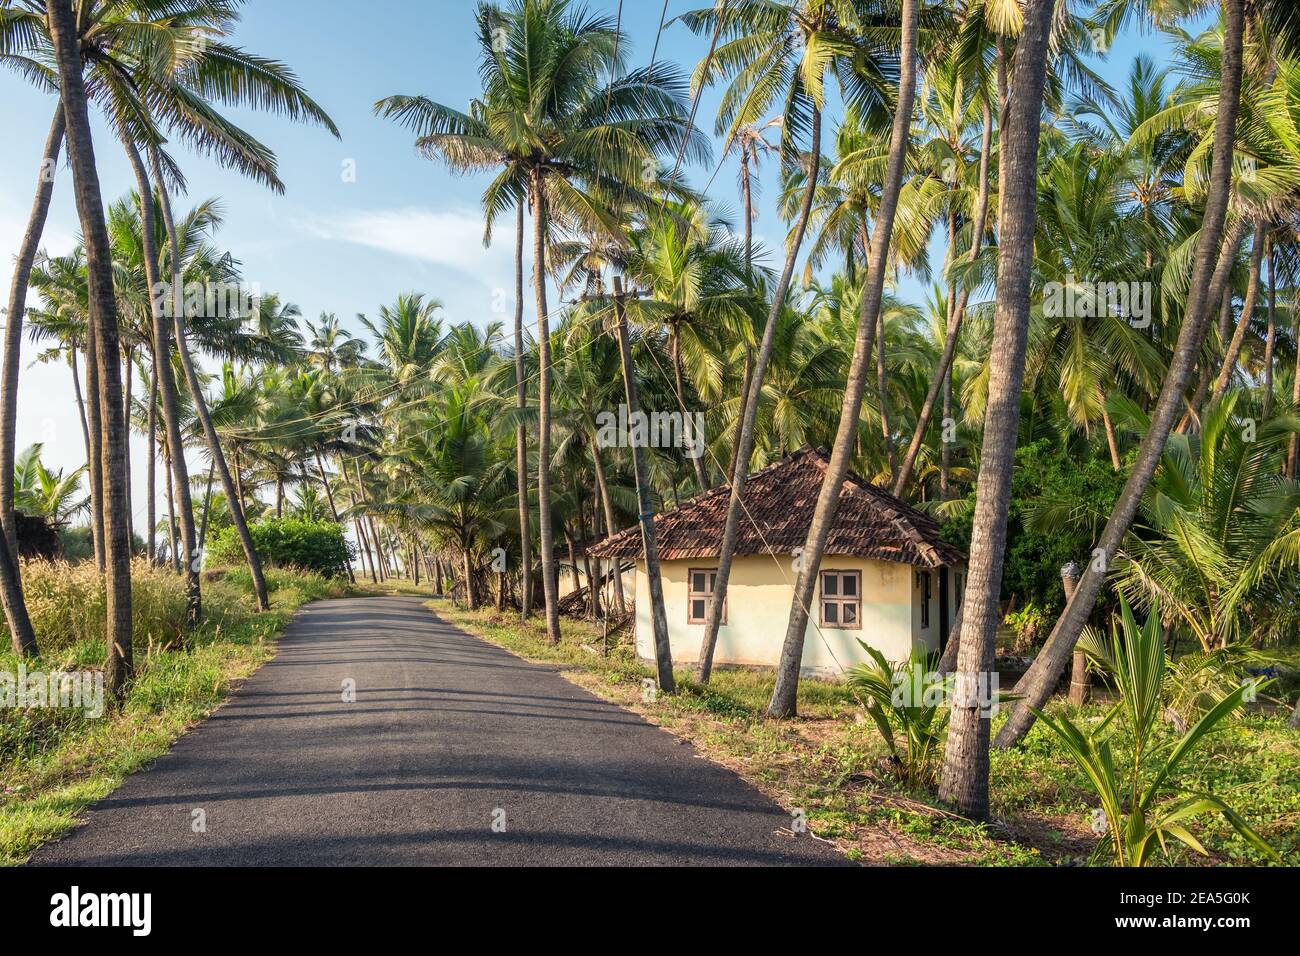 Rural landscape with village house and palm trees plantation in Kerala, India Stock Photo